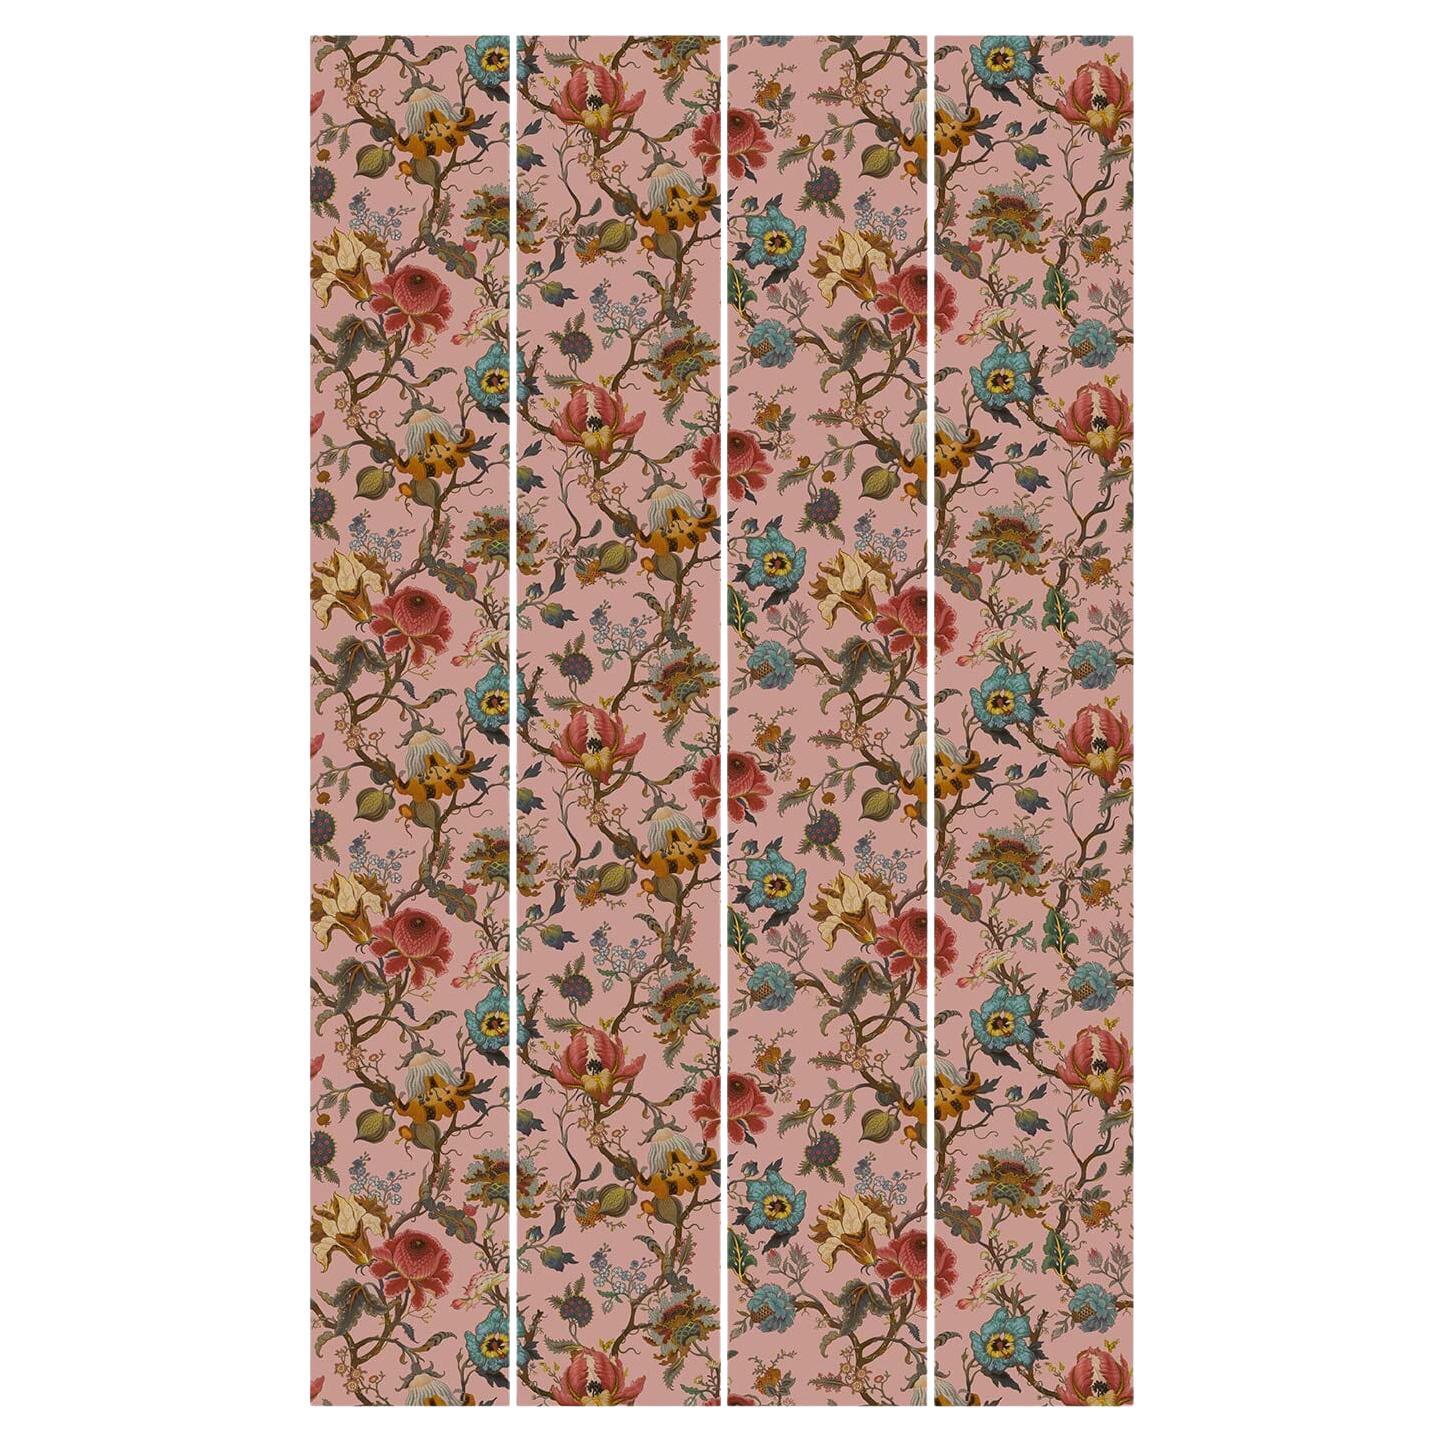 Introduce ARTEMIS to your home with this artful wallpaper stamped with intricately painted wild flowers. The blush pink hue is beautifully warm and will work in any number of settings. Inspired by Diana Vreeland's famous 'Garden in Hell' room, this